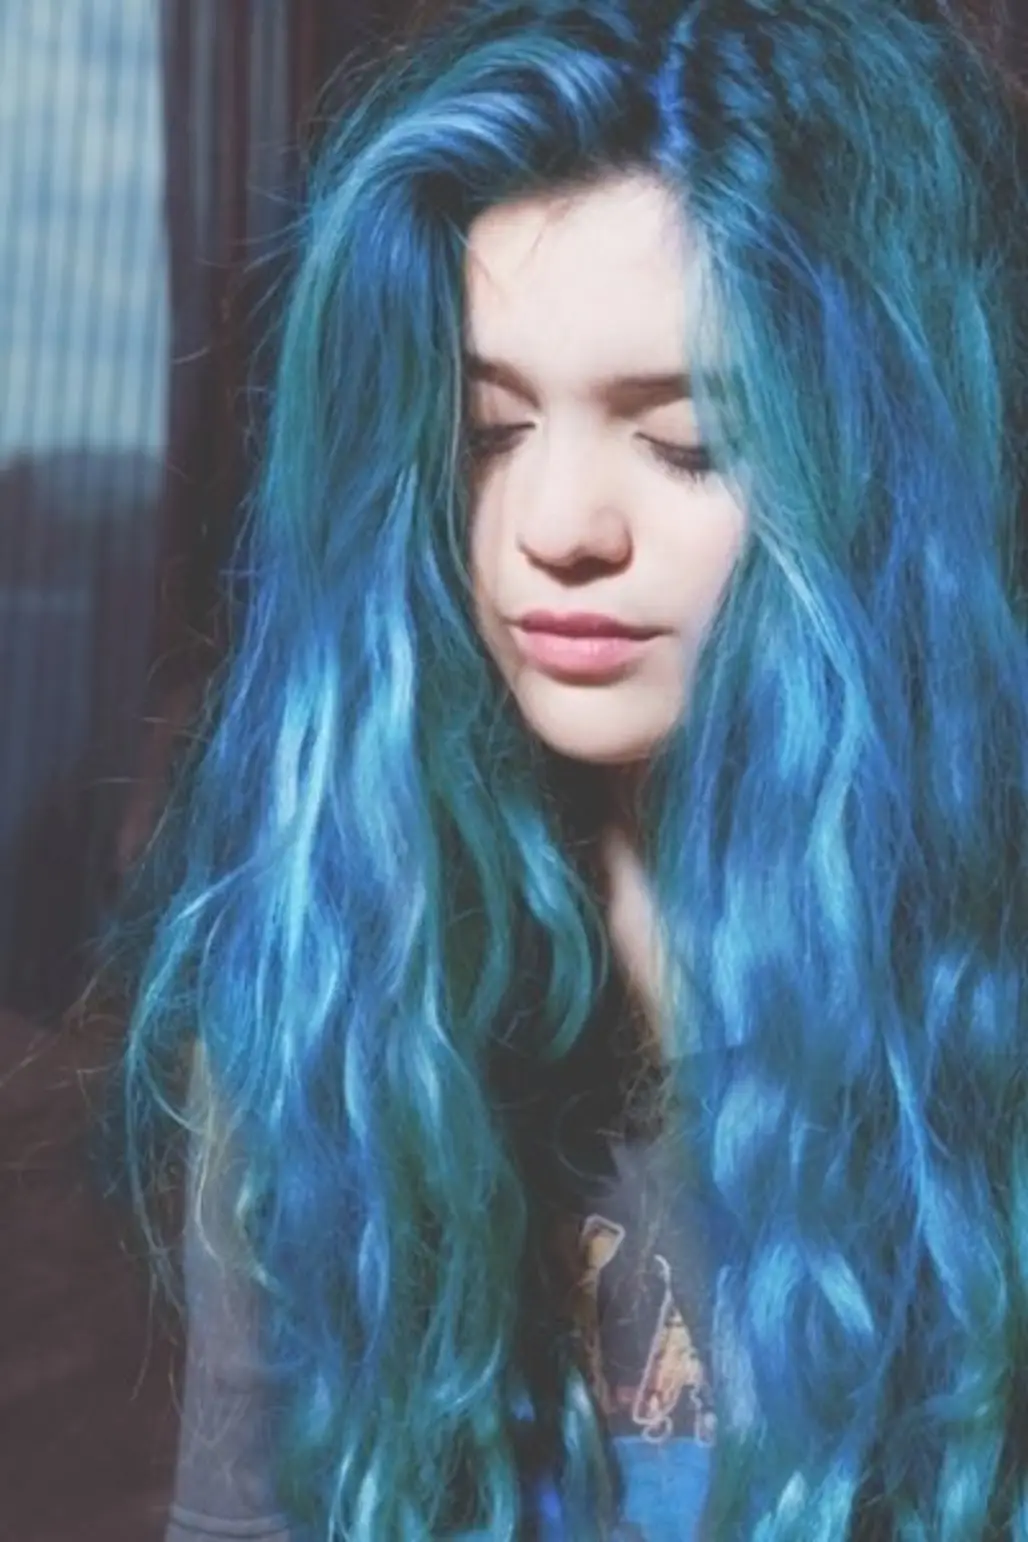 7 Reasons to Dye Your Hair a Crazy Color at Least Once